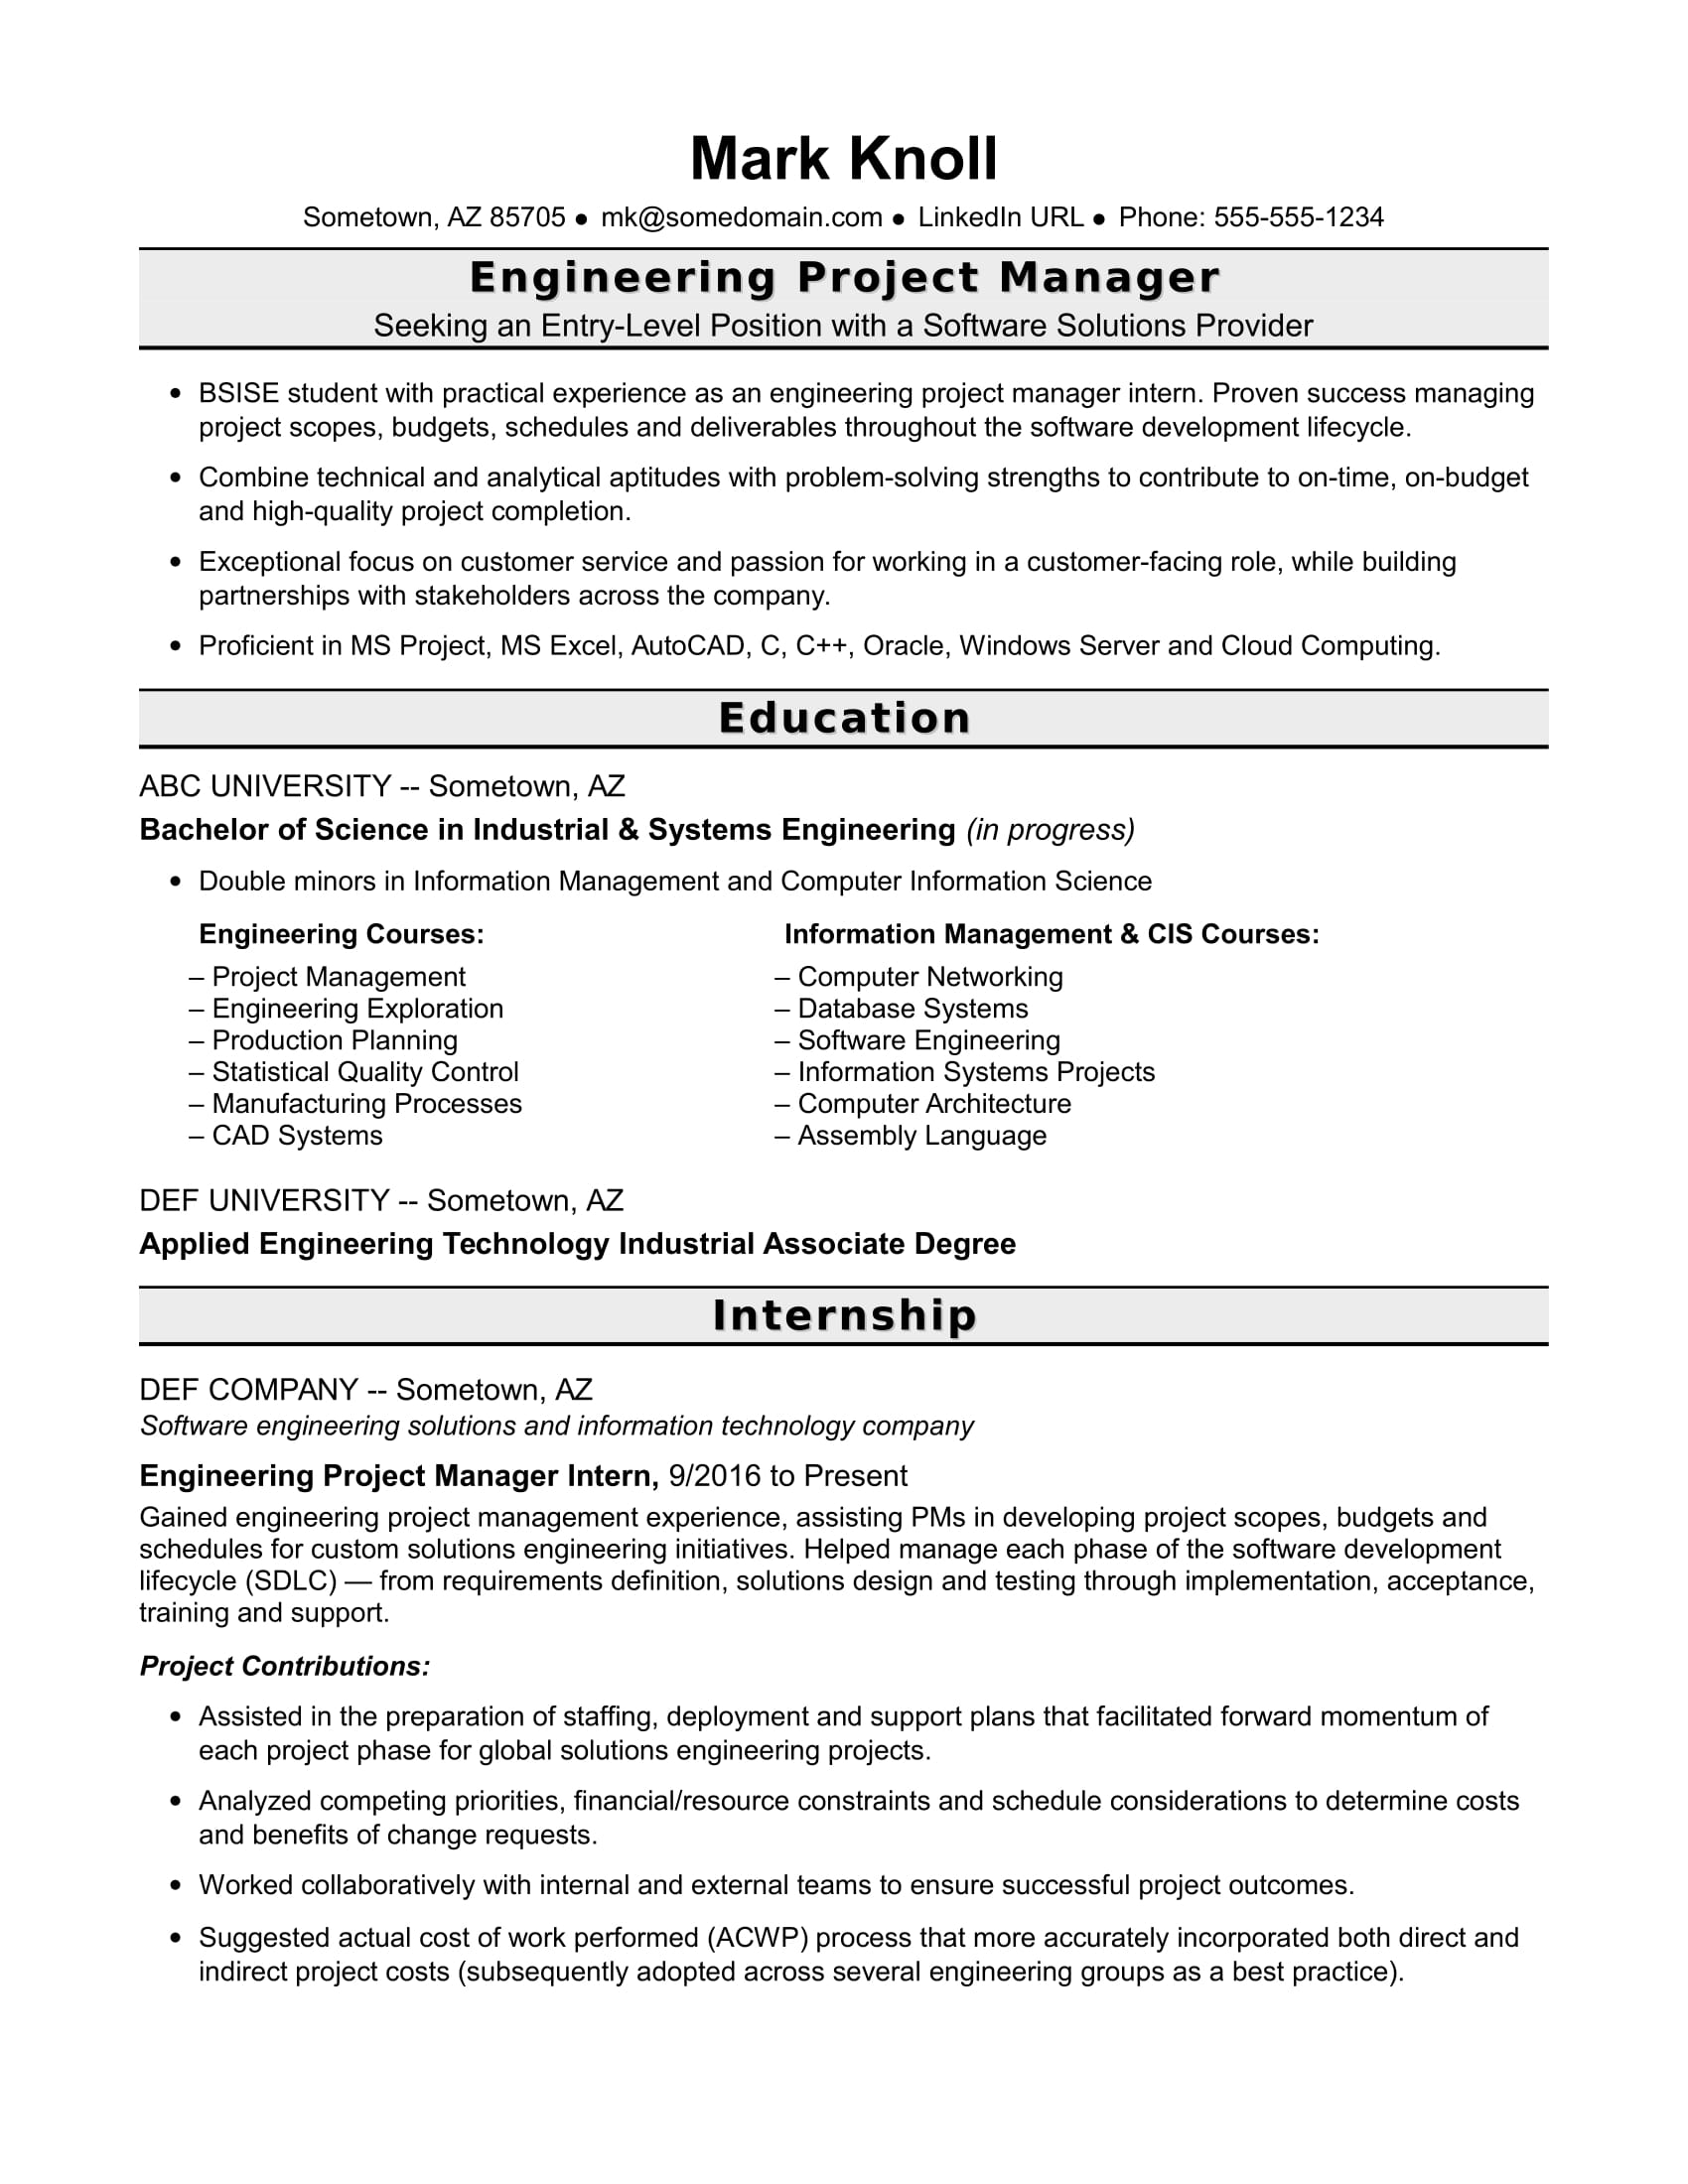 Resume Sample Of Engineering Manager